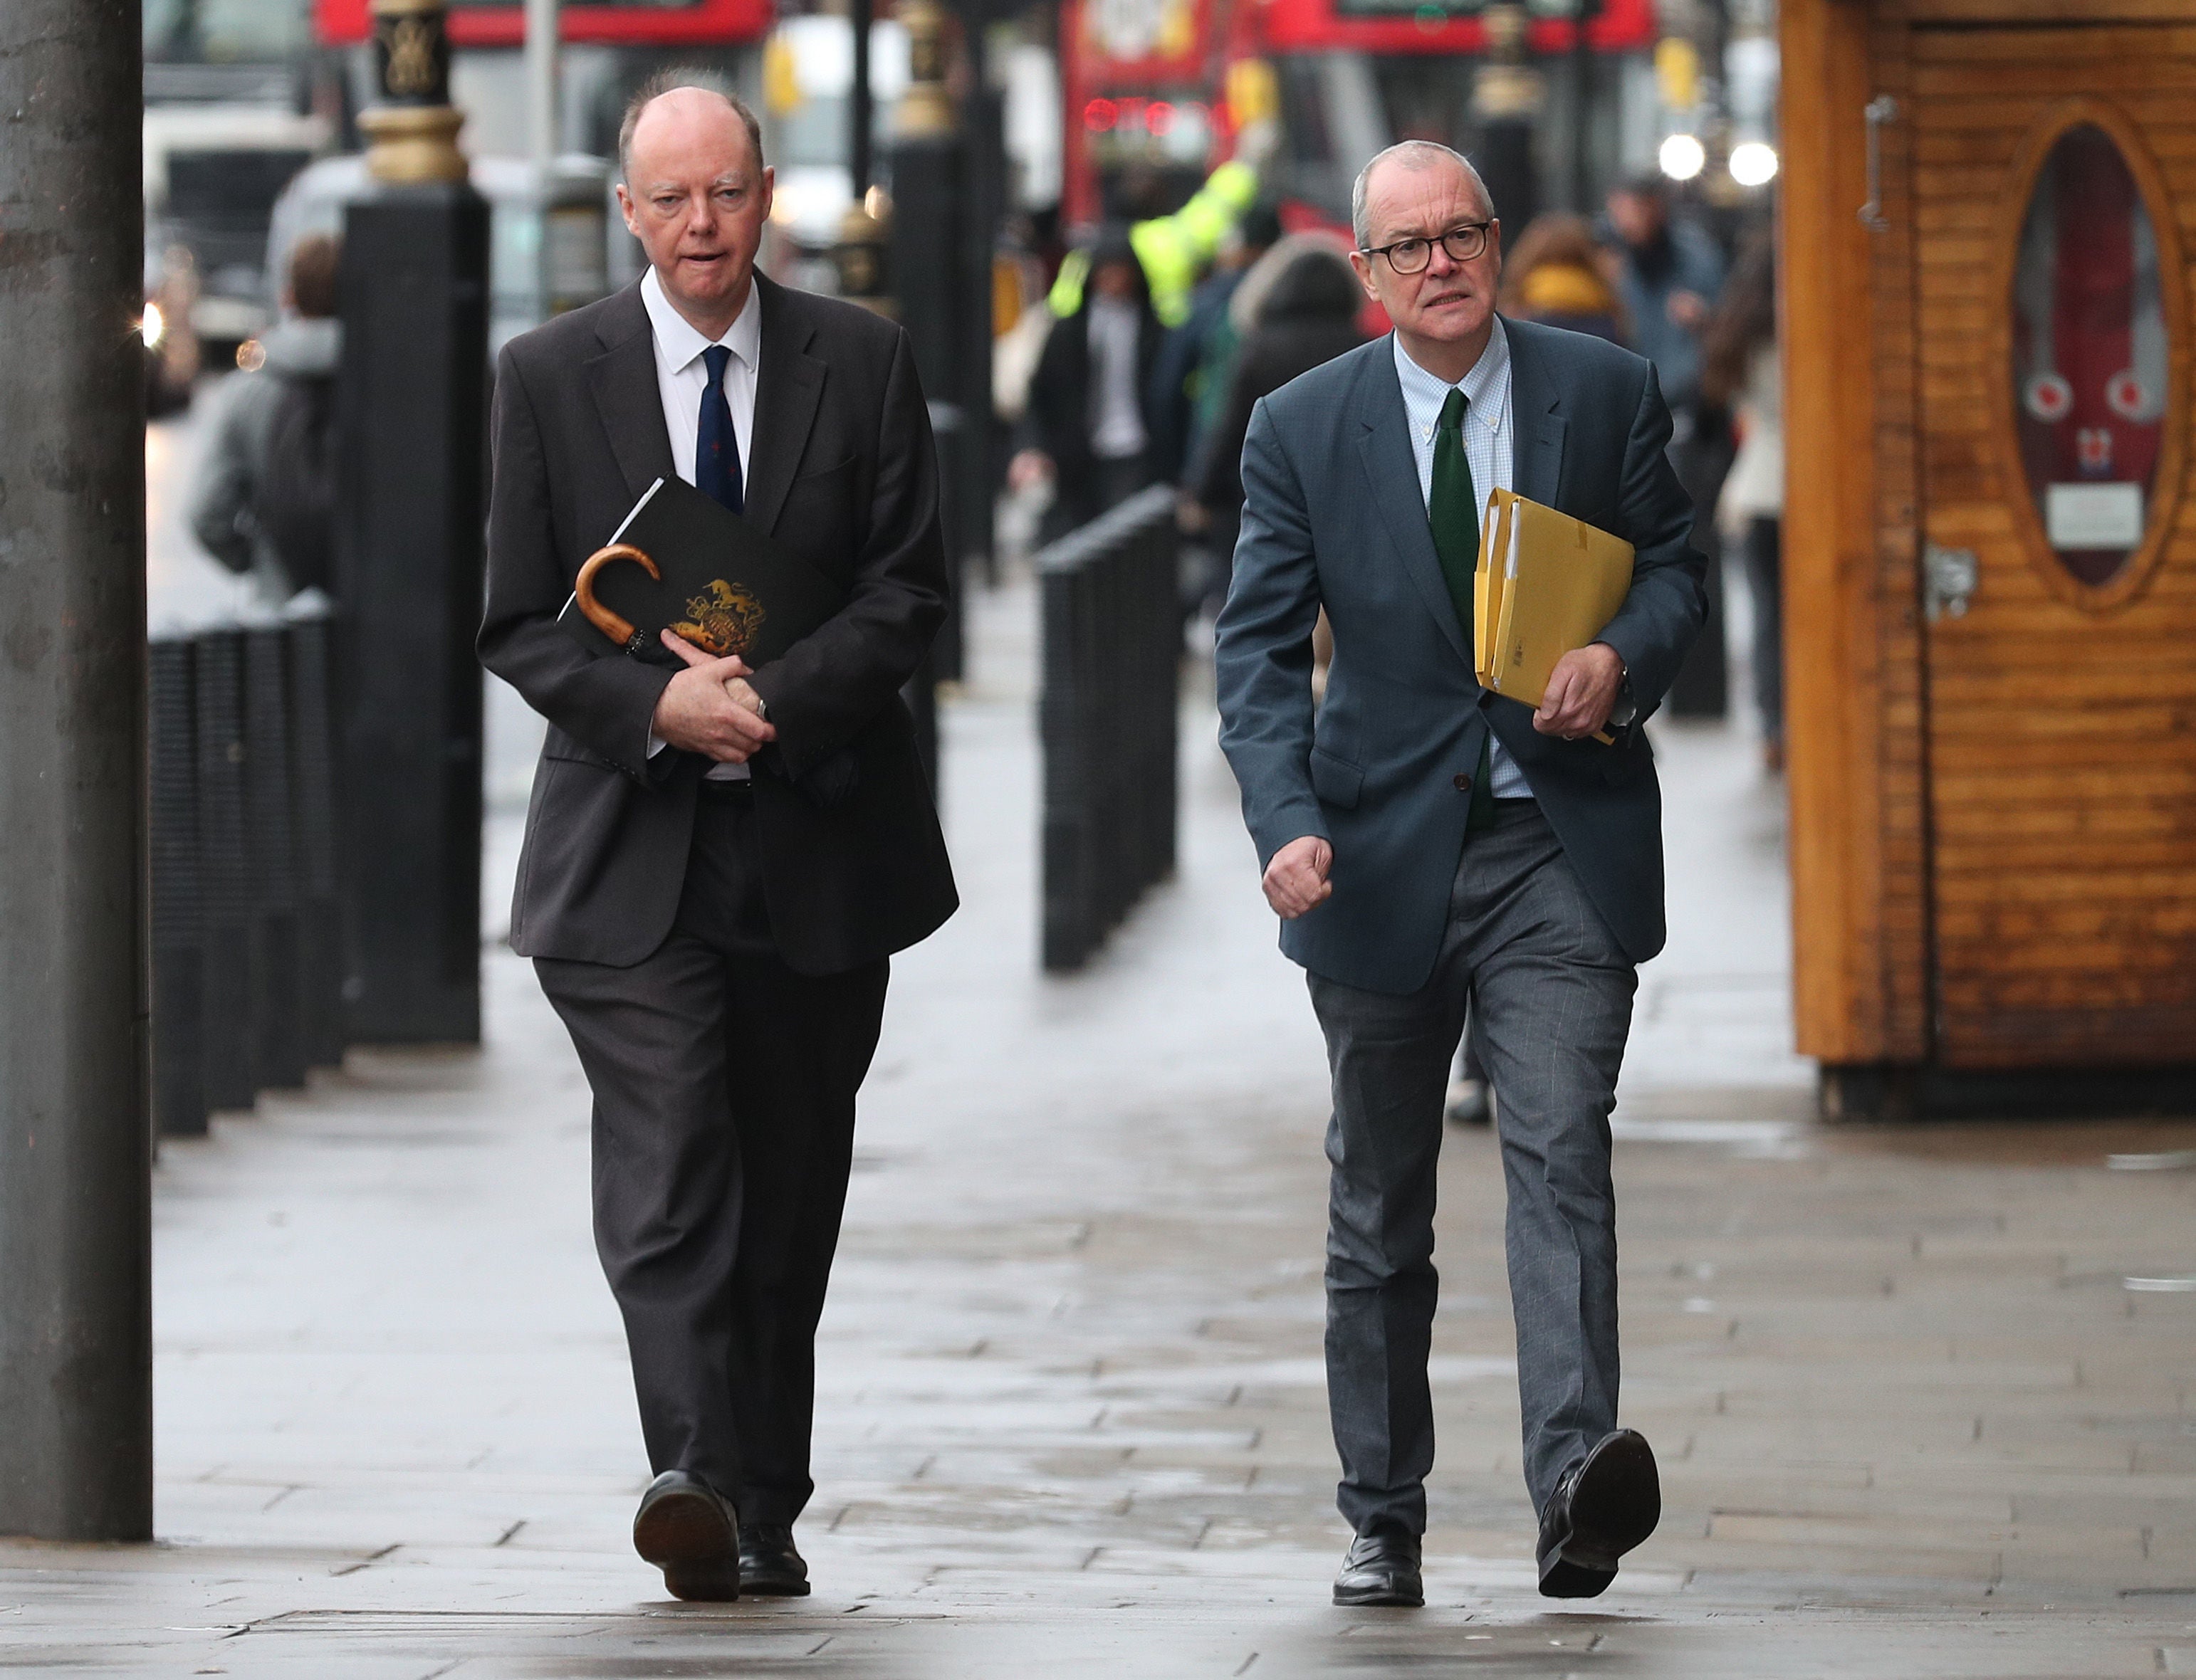 Whitty and Vallance in Westminster last year